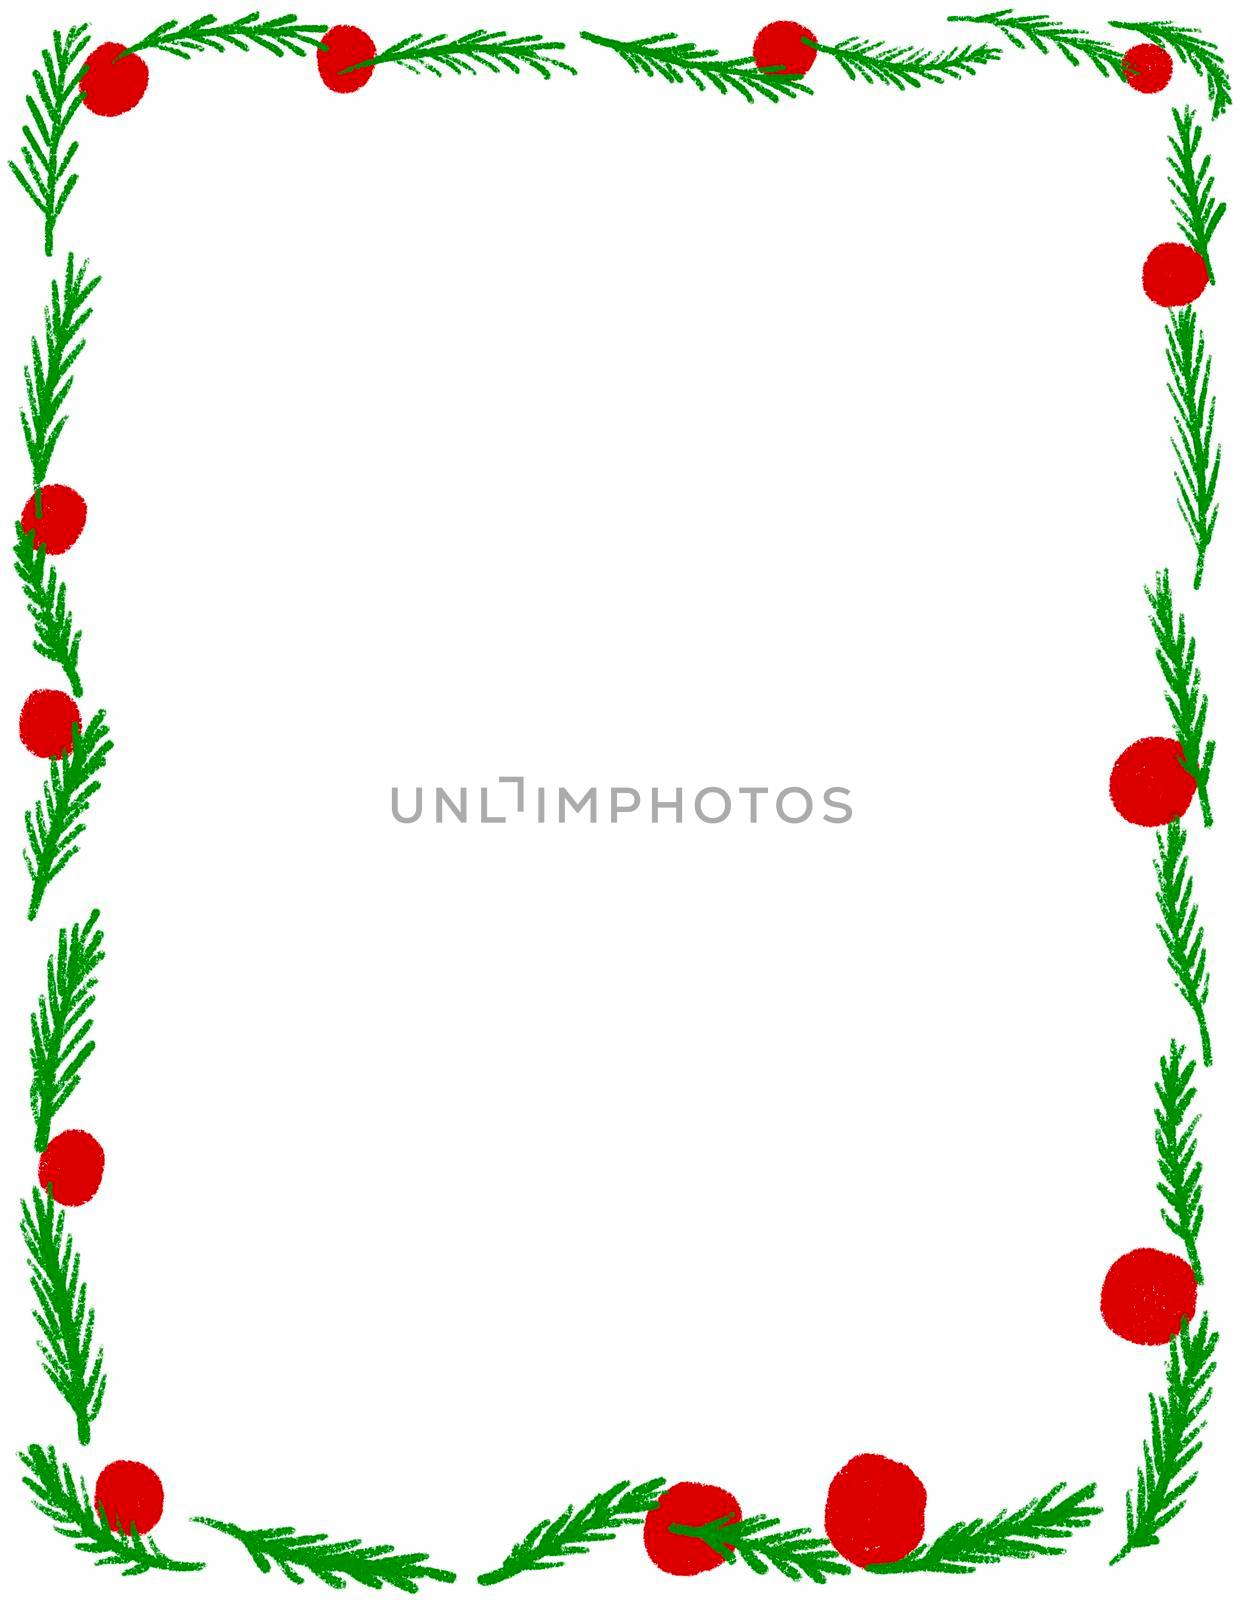 Hand drawn Christms frame with red green traditional ornaments and empty copyspace. December winter xmas decoration border, season holiday decor edge design, simple minimalist style doodle cartoon